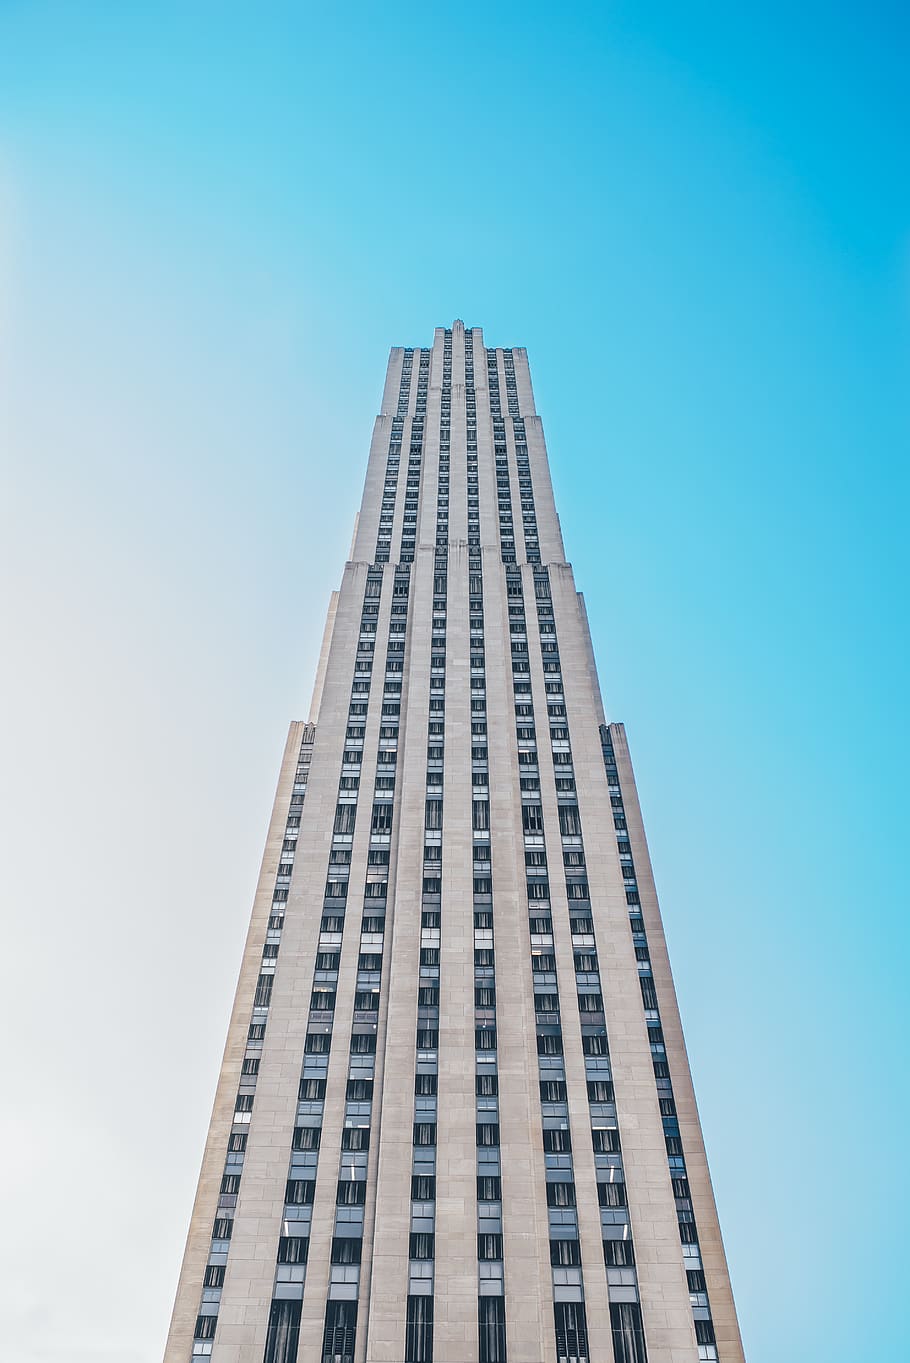 buildings, architecture, city, urban, business, corporate, high rise, downtown, sky, building exterior